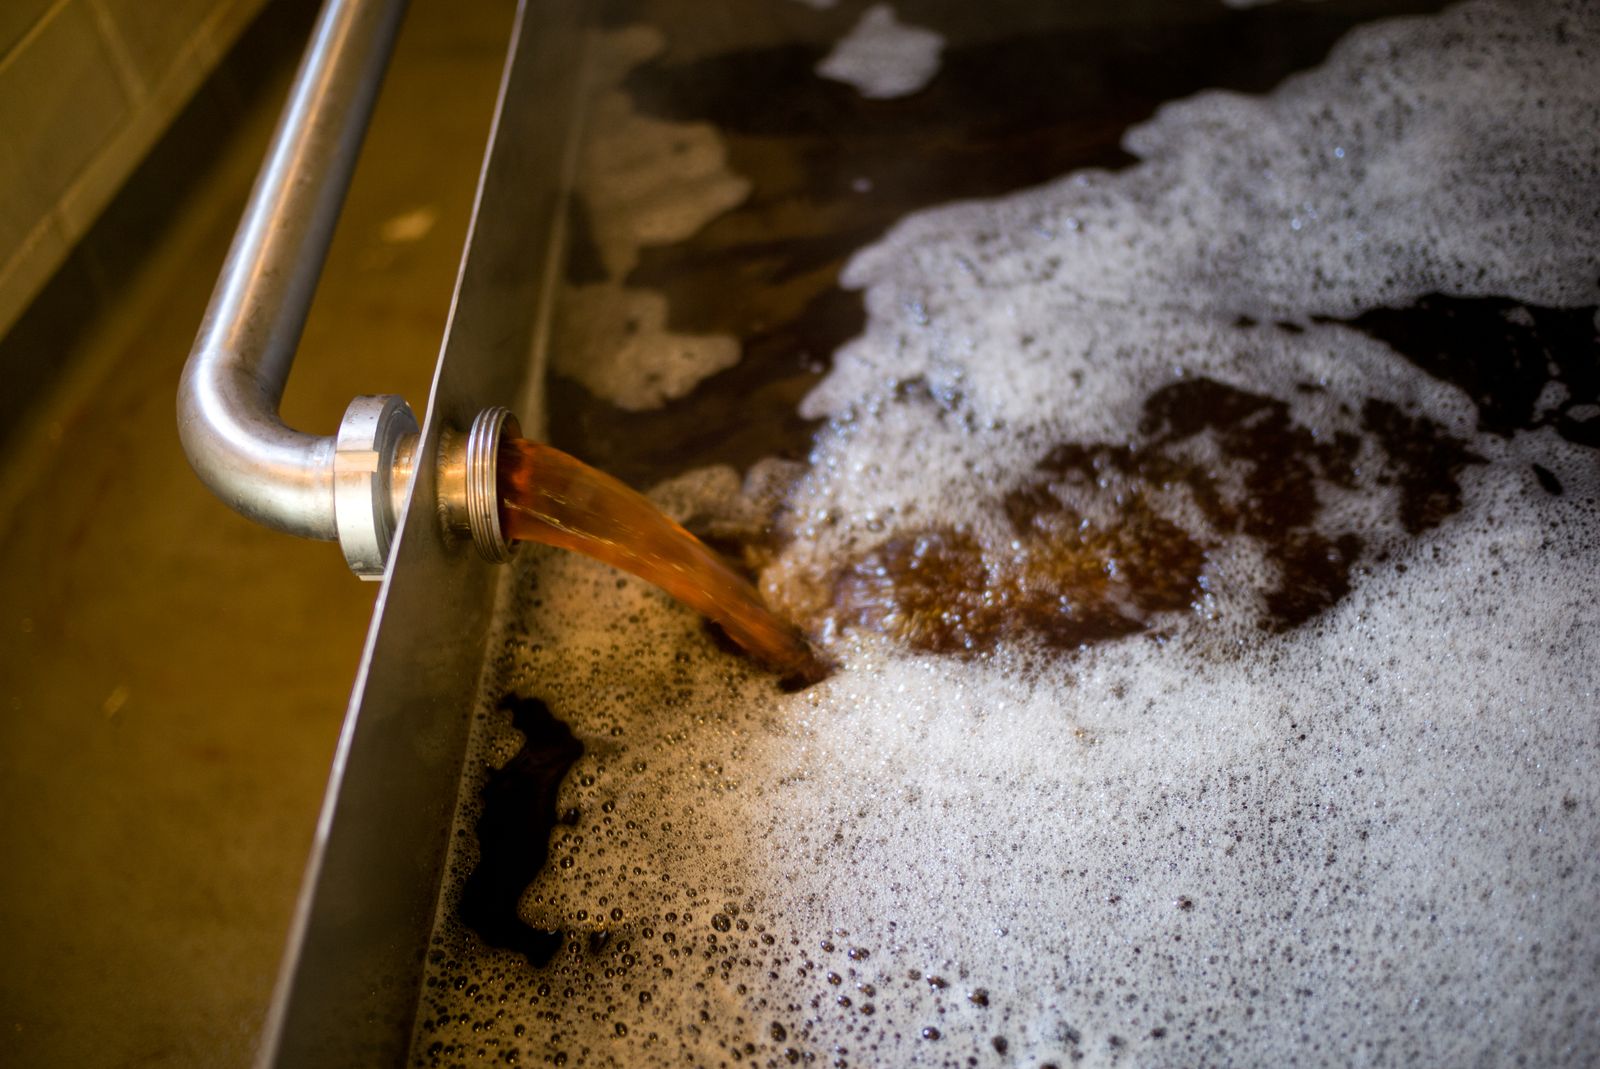 The fresh boiling wort is being pumped onto the coolship.